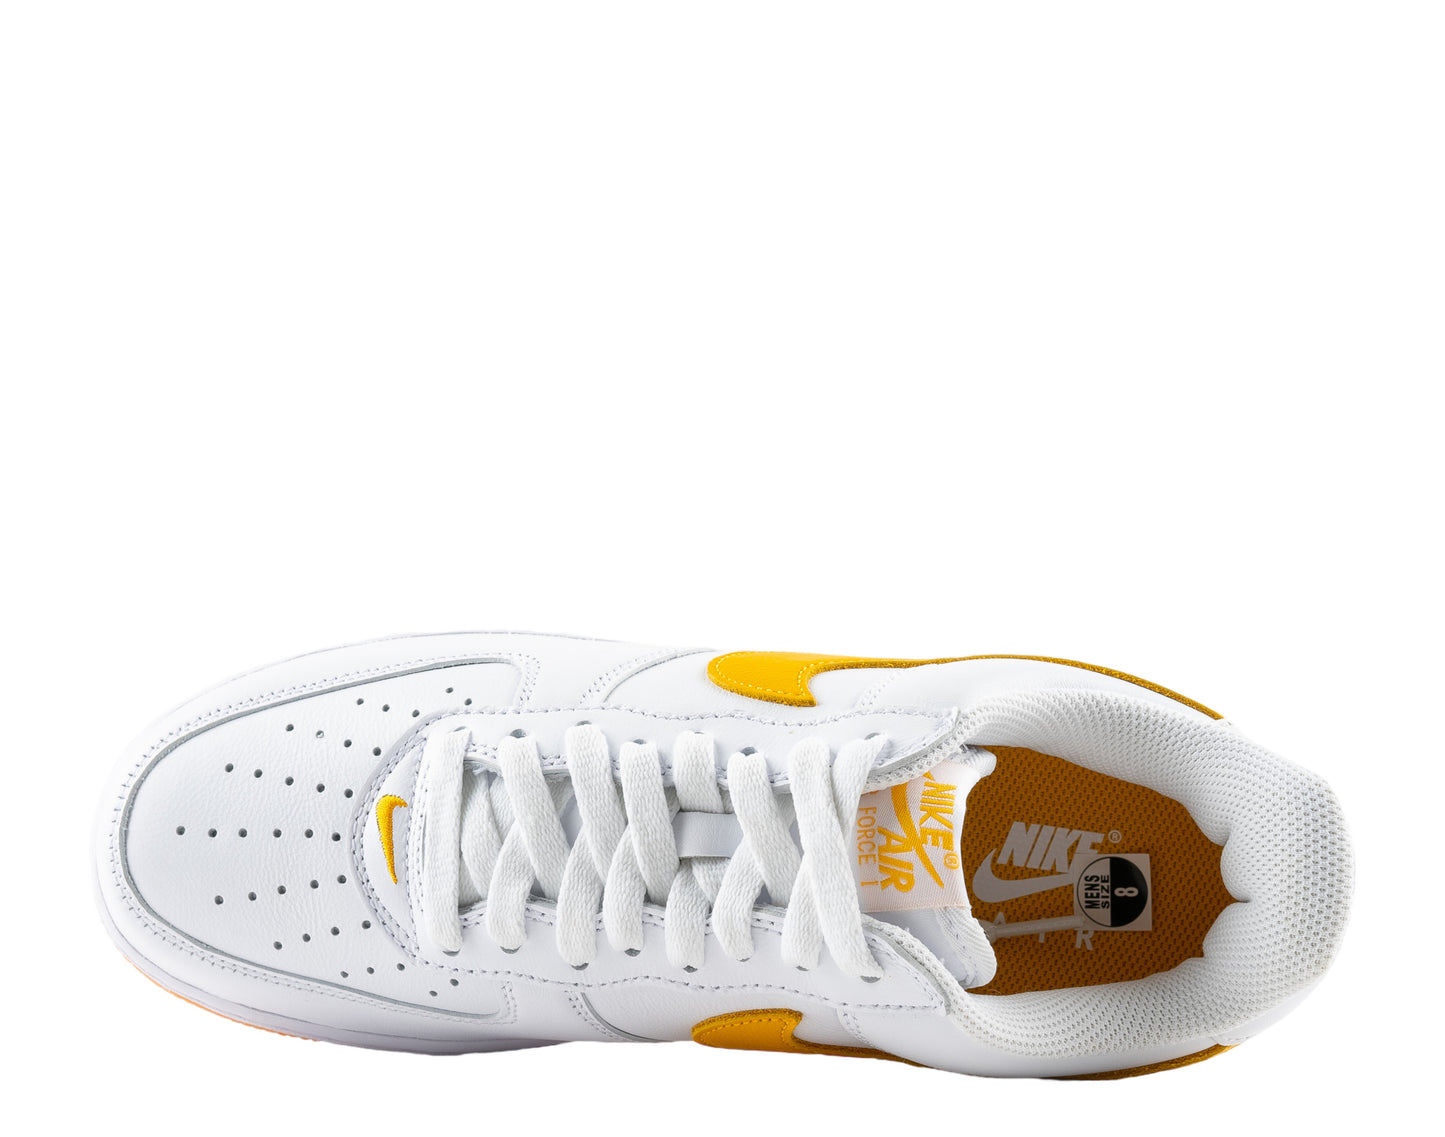 Nike Air Force 1 Low Retro QS Men's Basketball Shoes